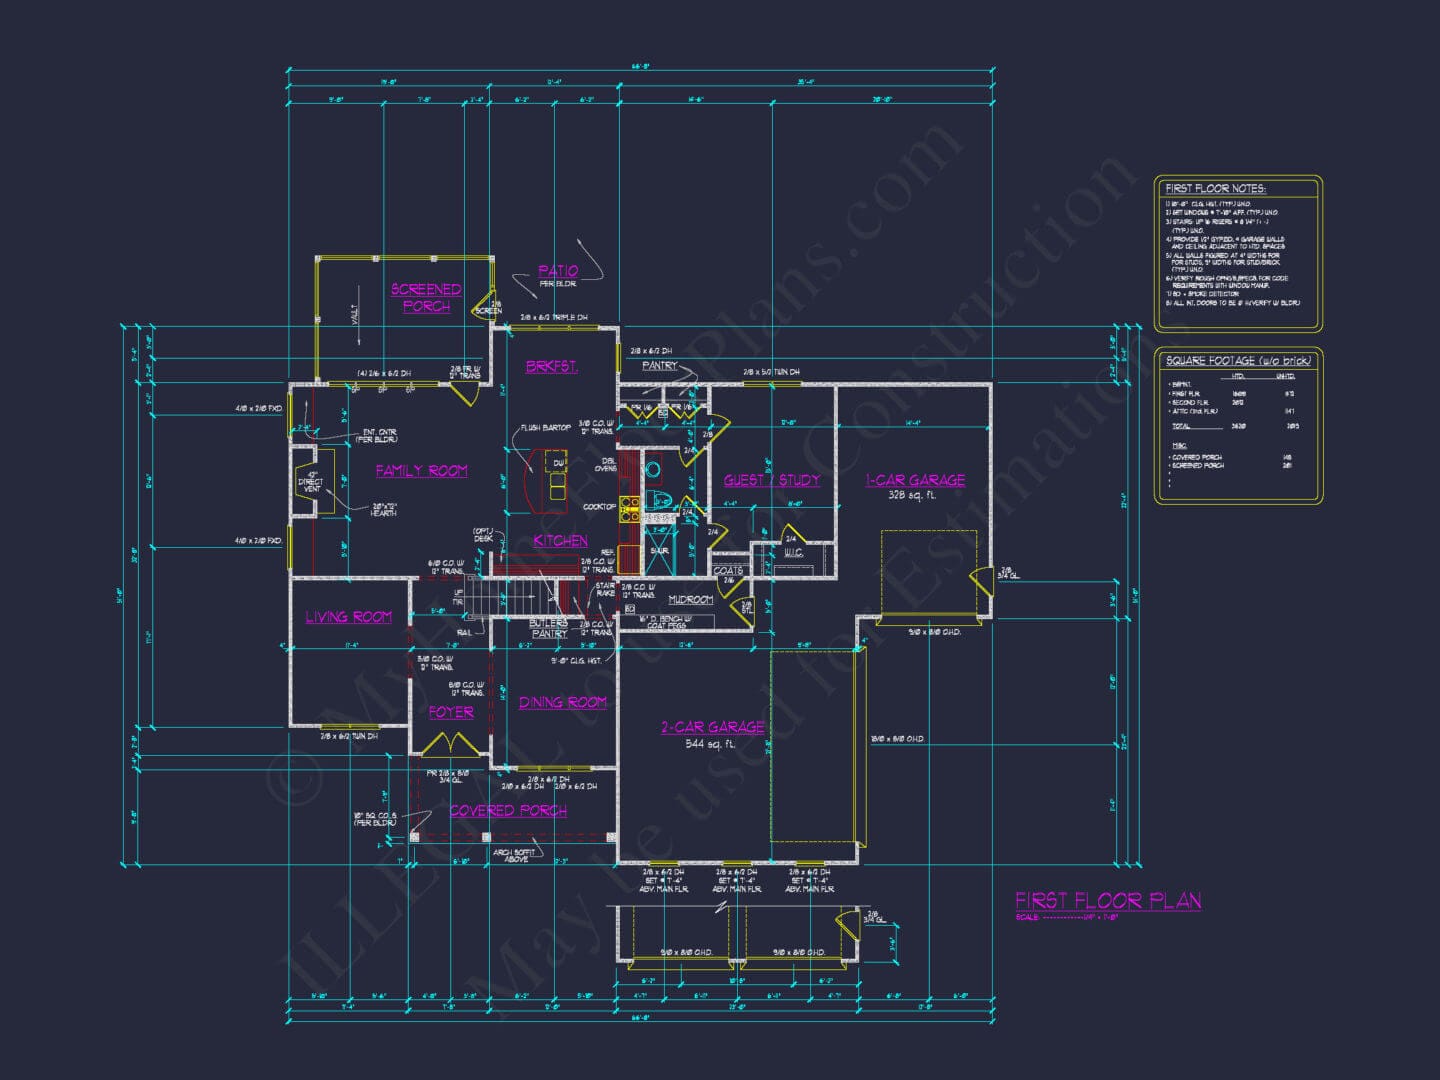 12-2018 my home floor plans_Page_13